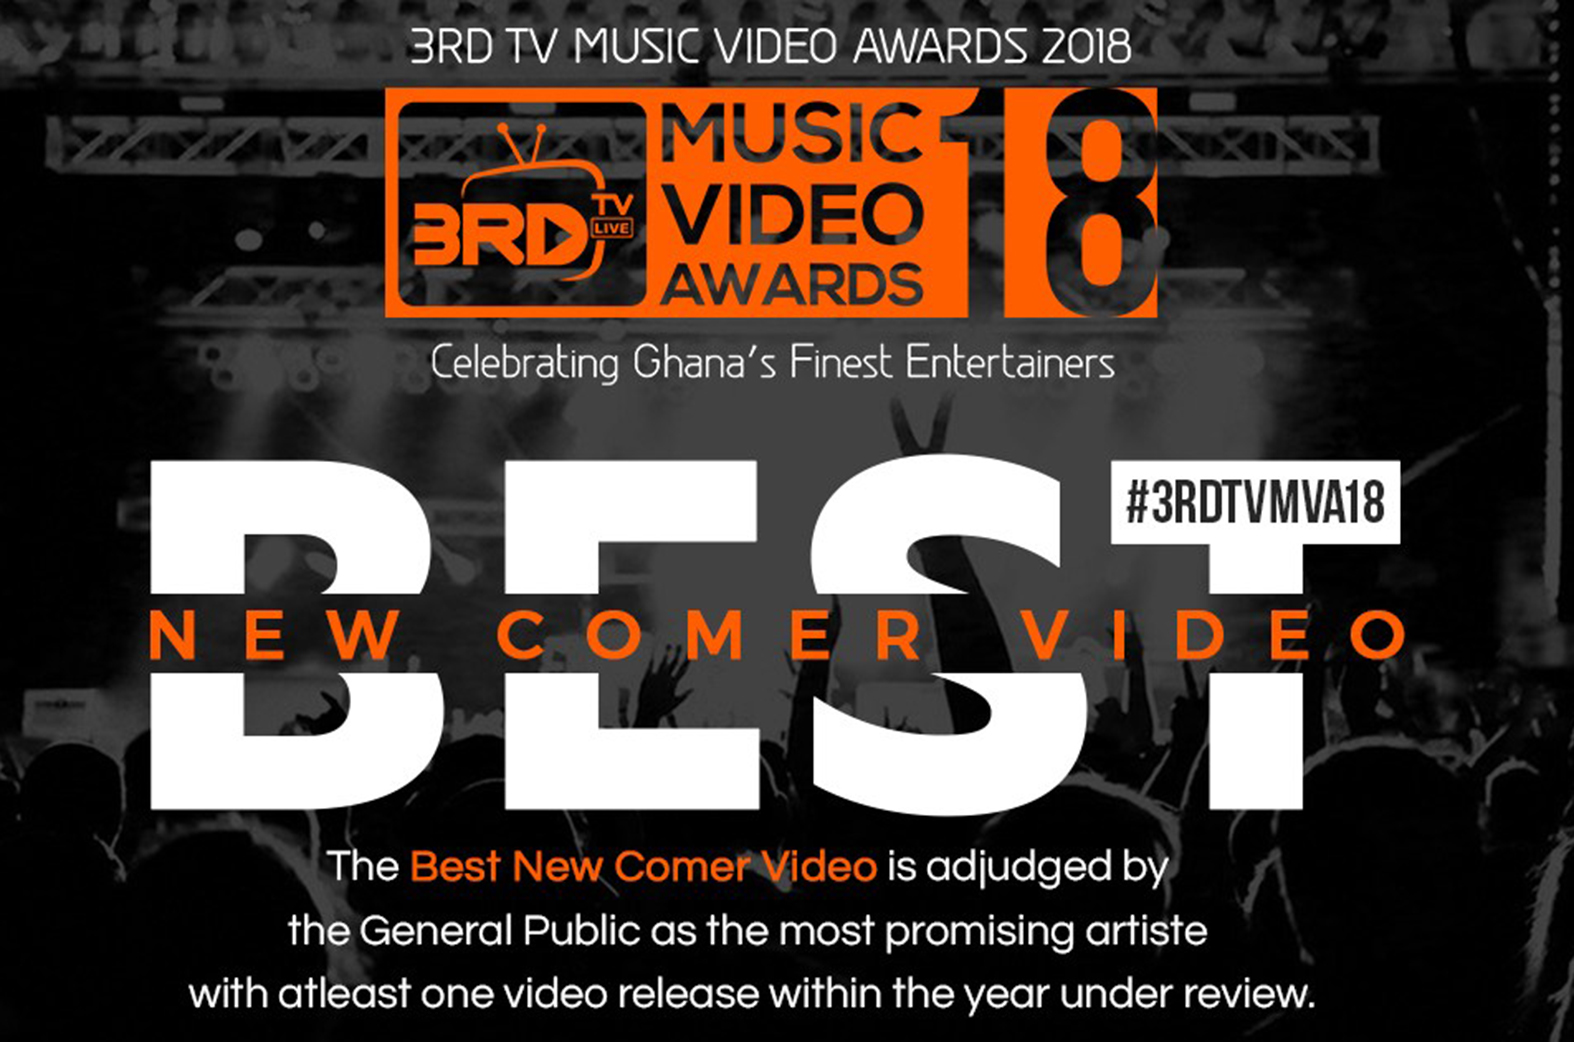 Vote your nominees for 3rdTV MVAs Best New Comer Video